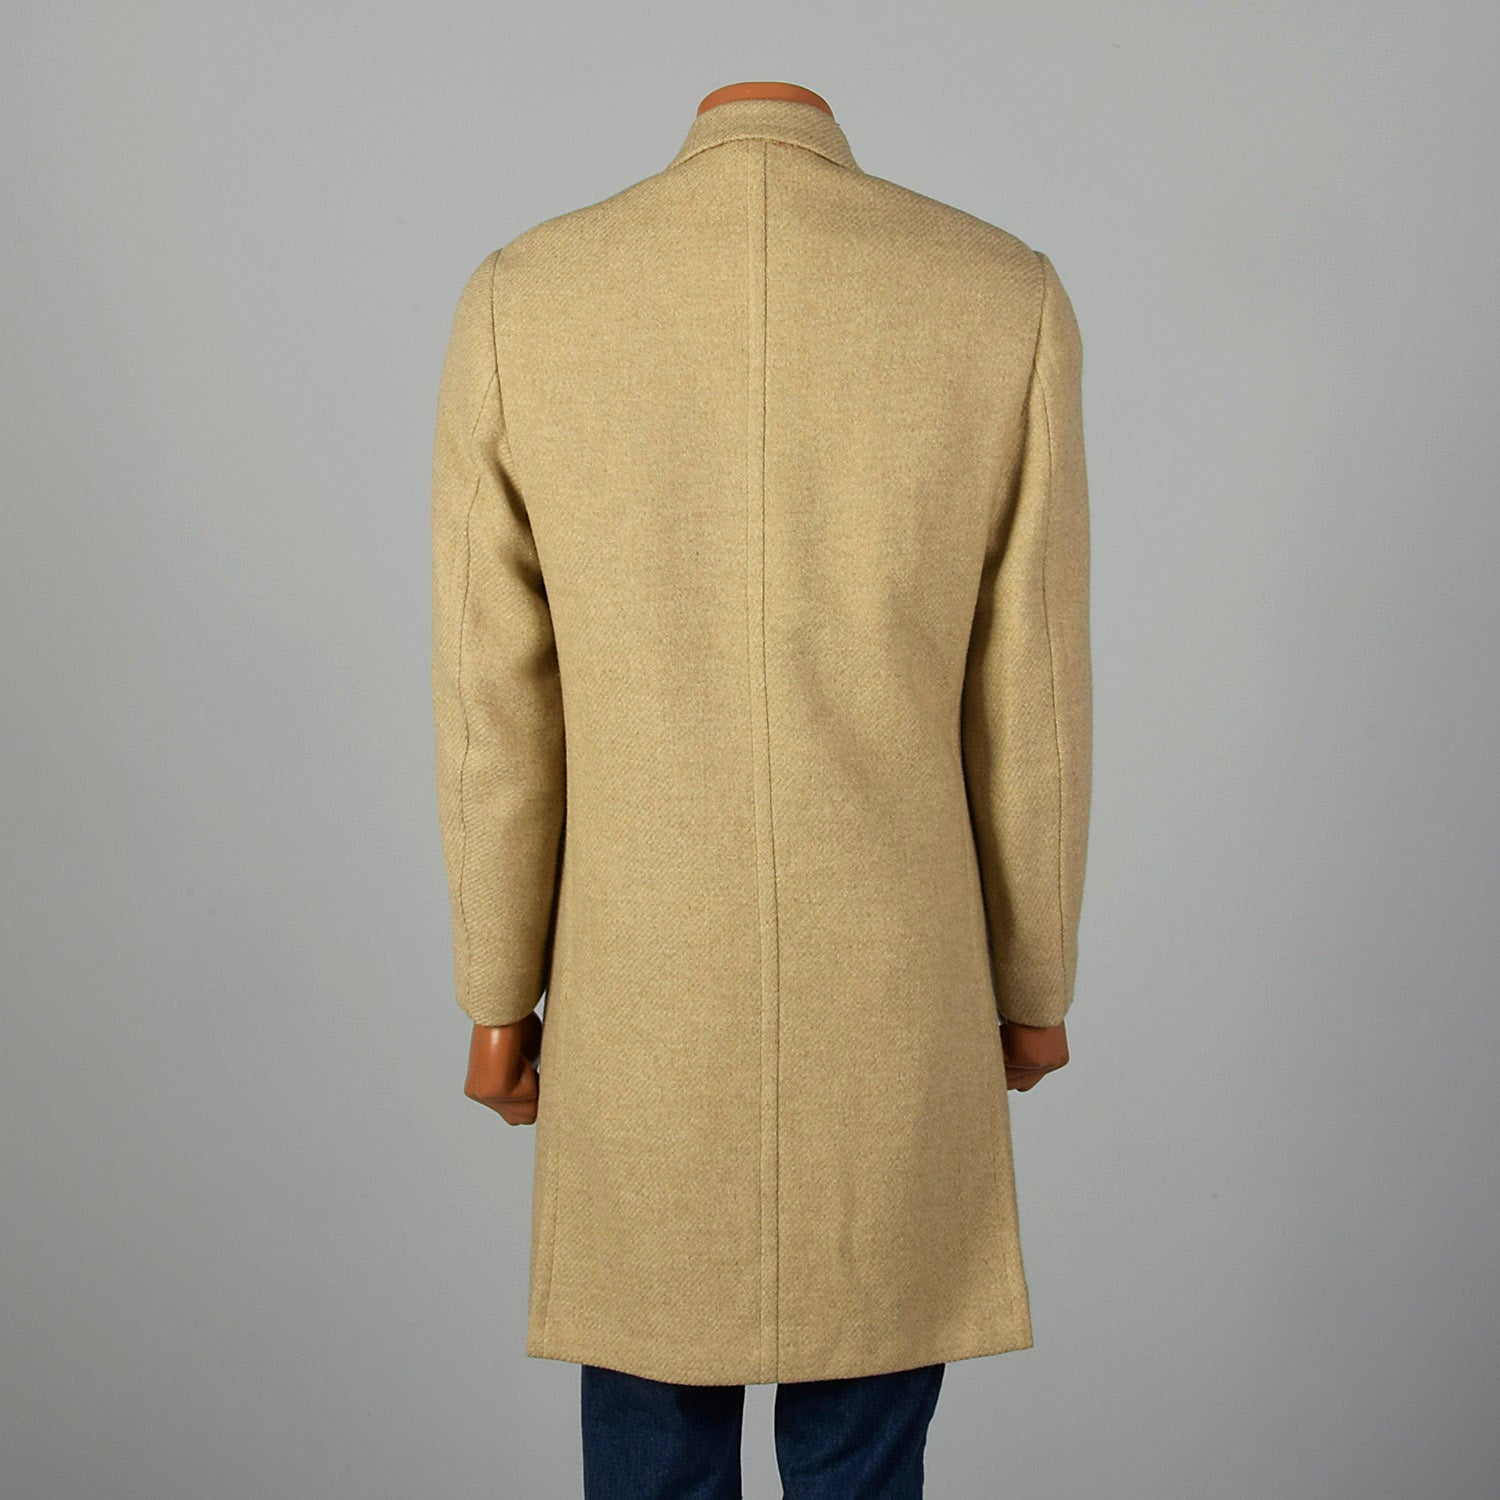 Small 1960s Men's Tan Double Breasted Coat